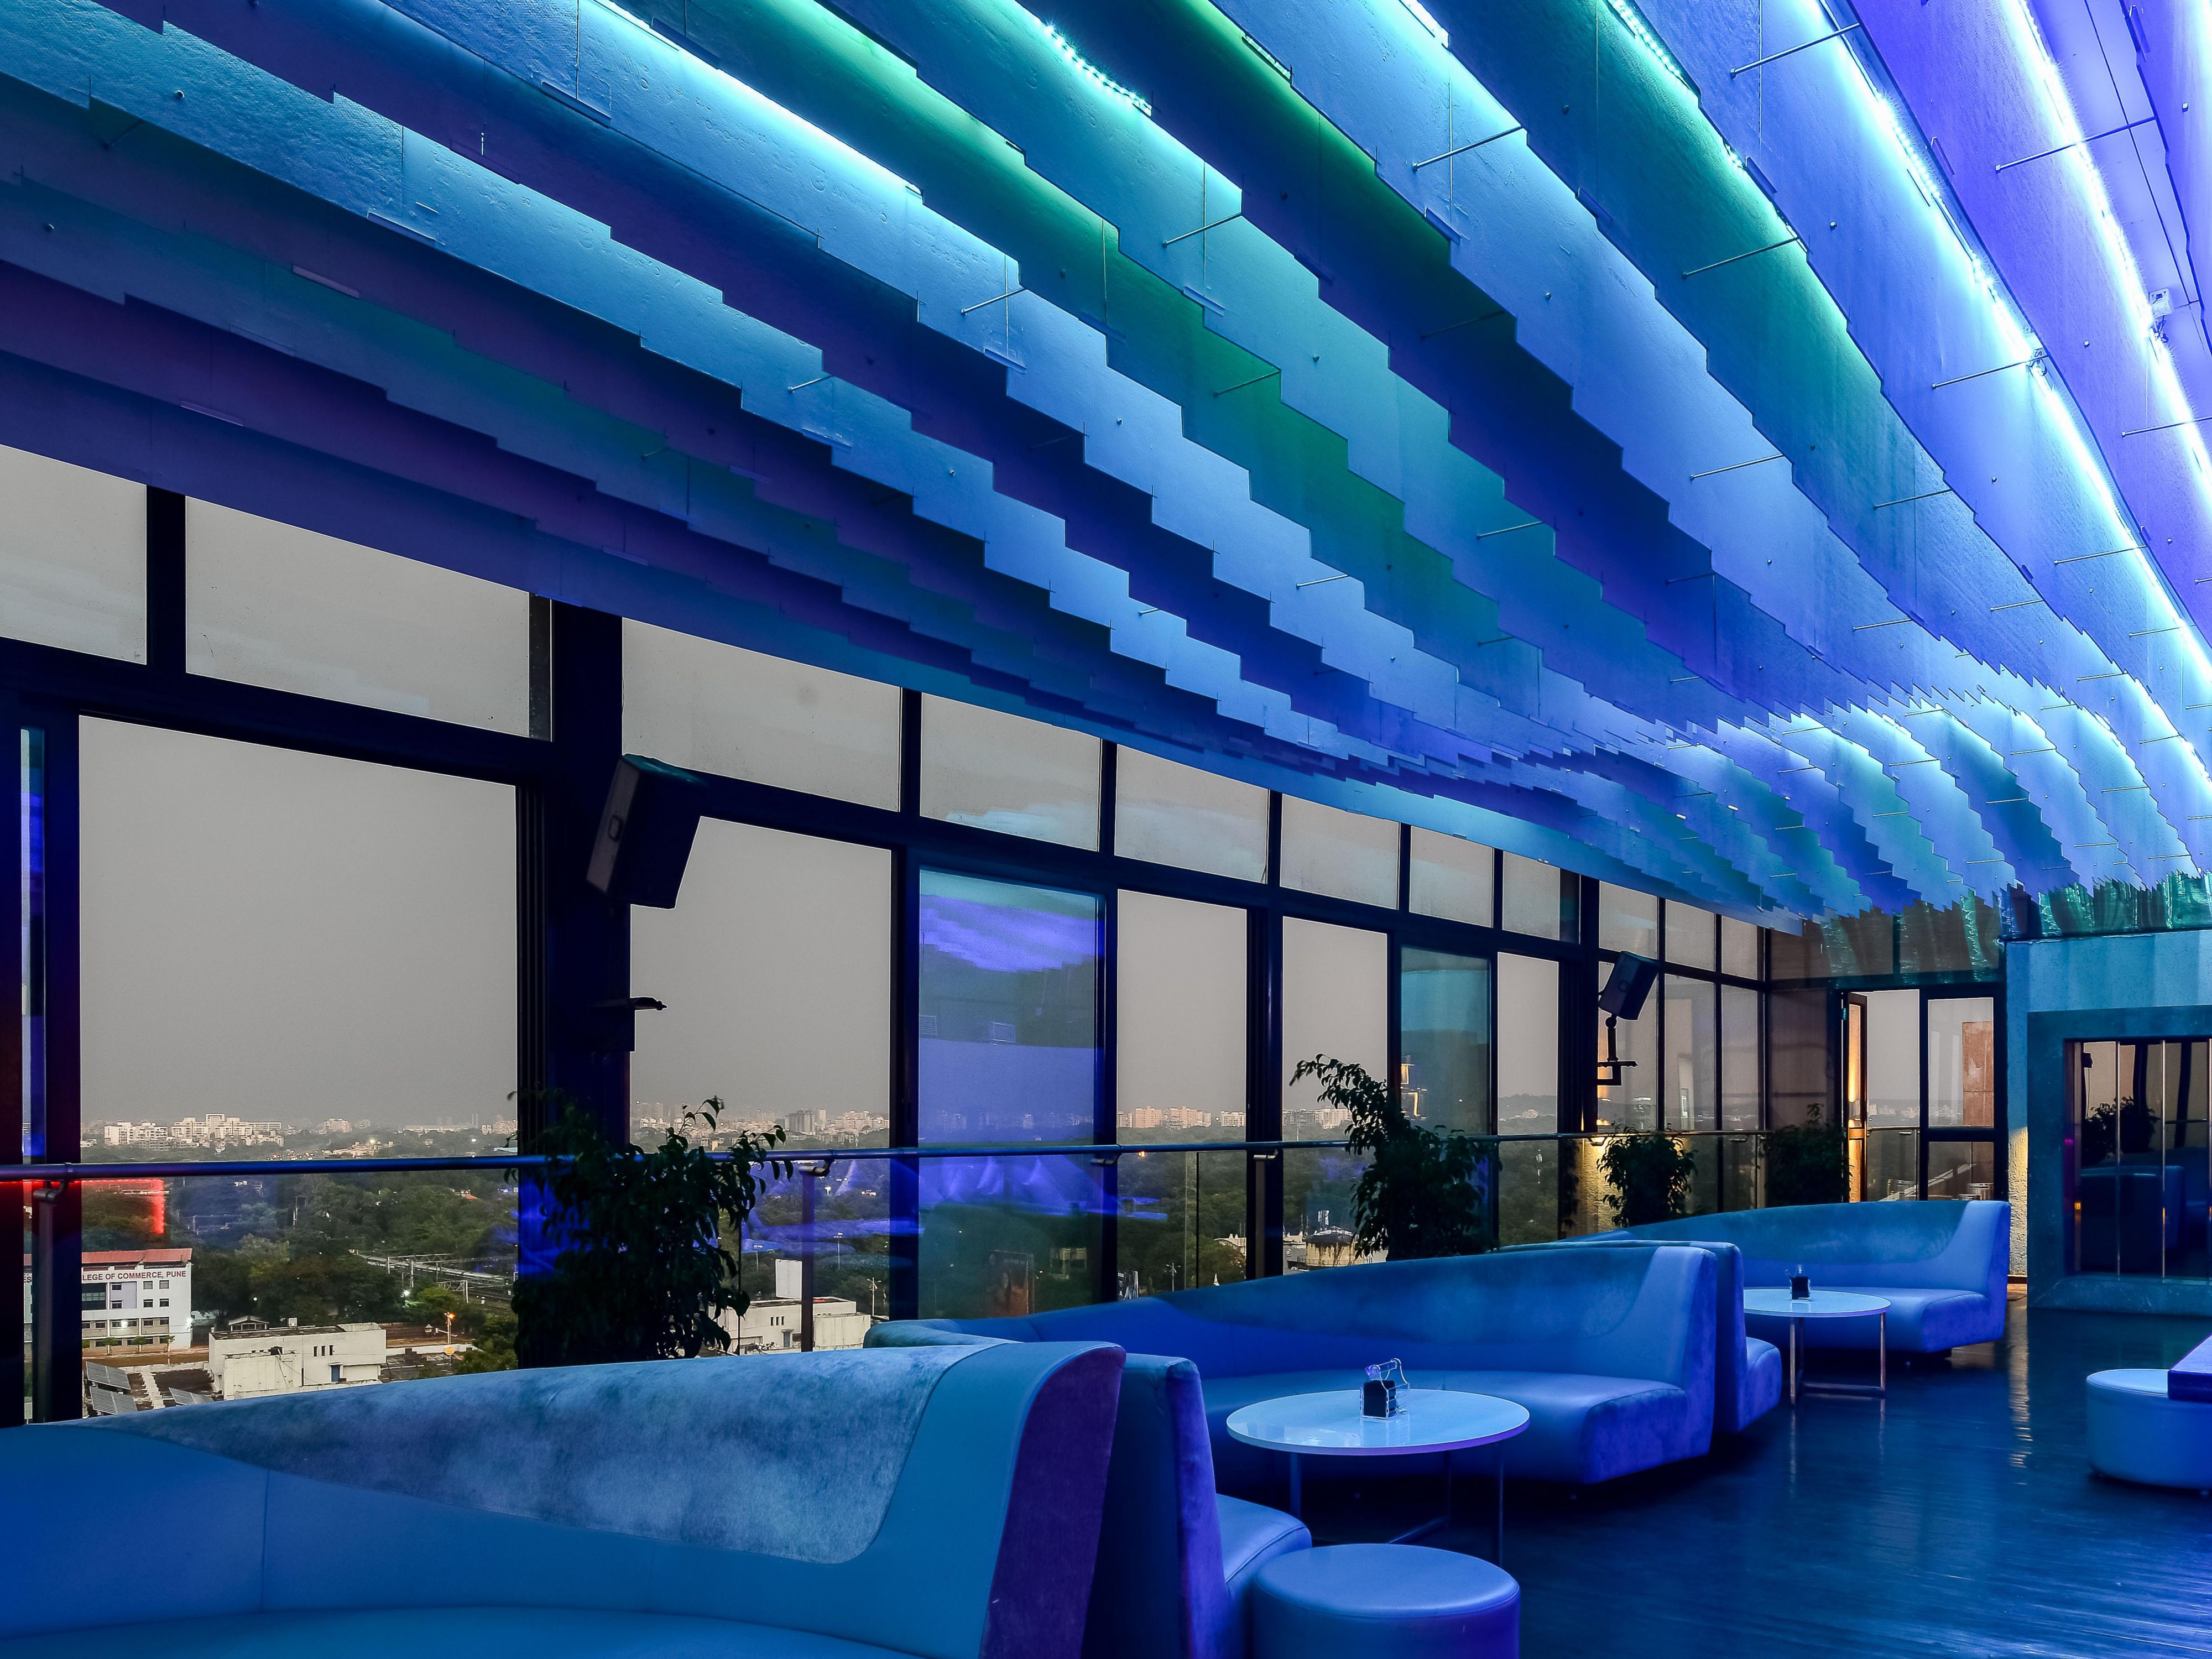 Experience Pune's nightlife at Evviva The Sky Lounge. Enjoy a panoramic view of the city with sizzling bites and refreshing signature sips.